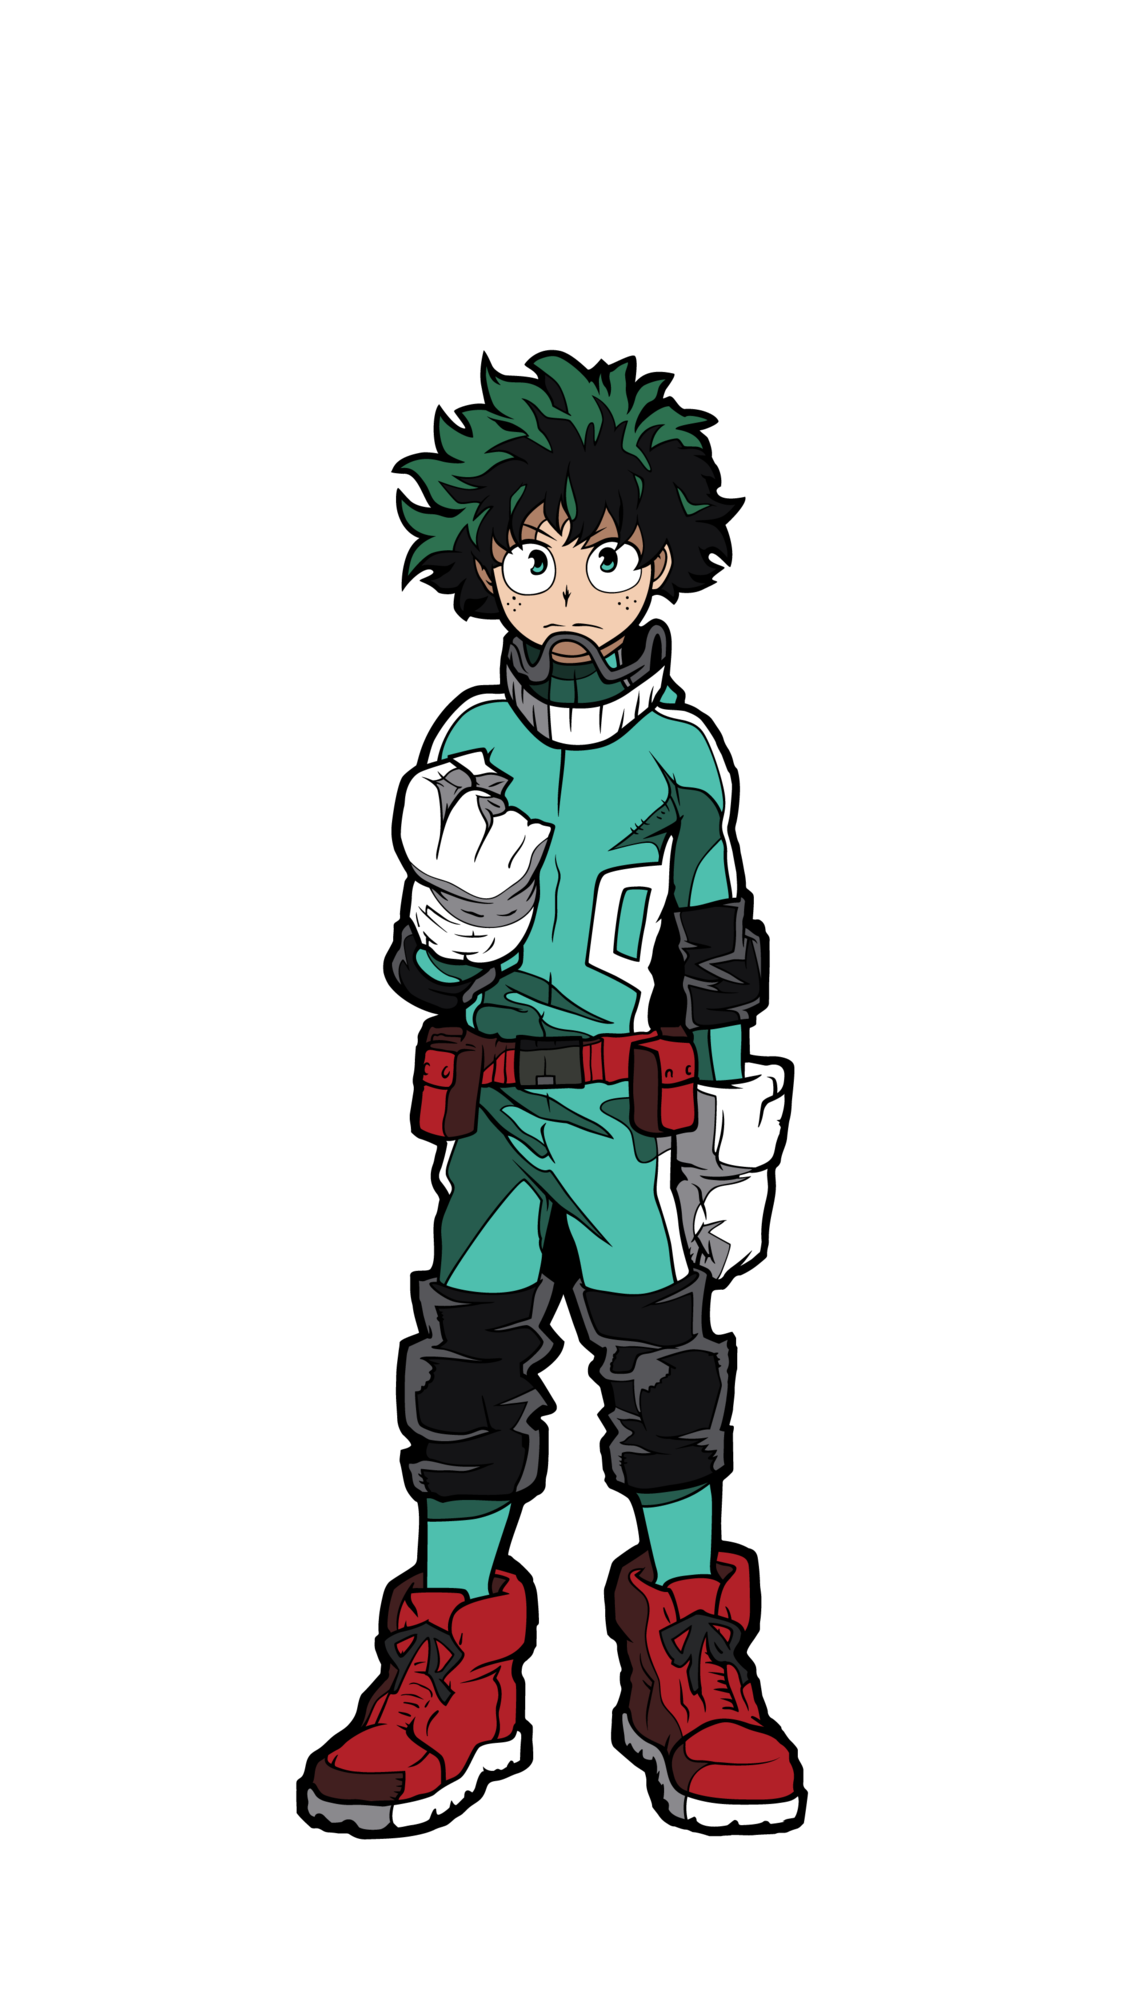 Download Images Hero Academia My PNG Download Free HQ PNG Image | FreePNGImg